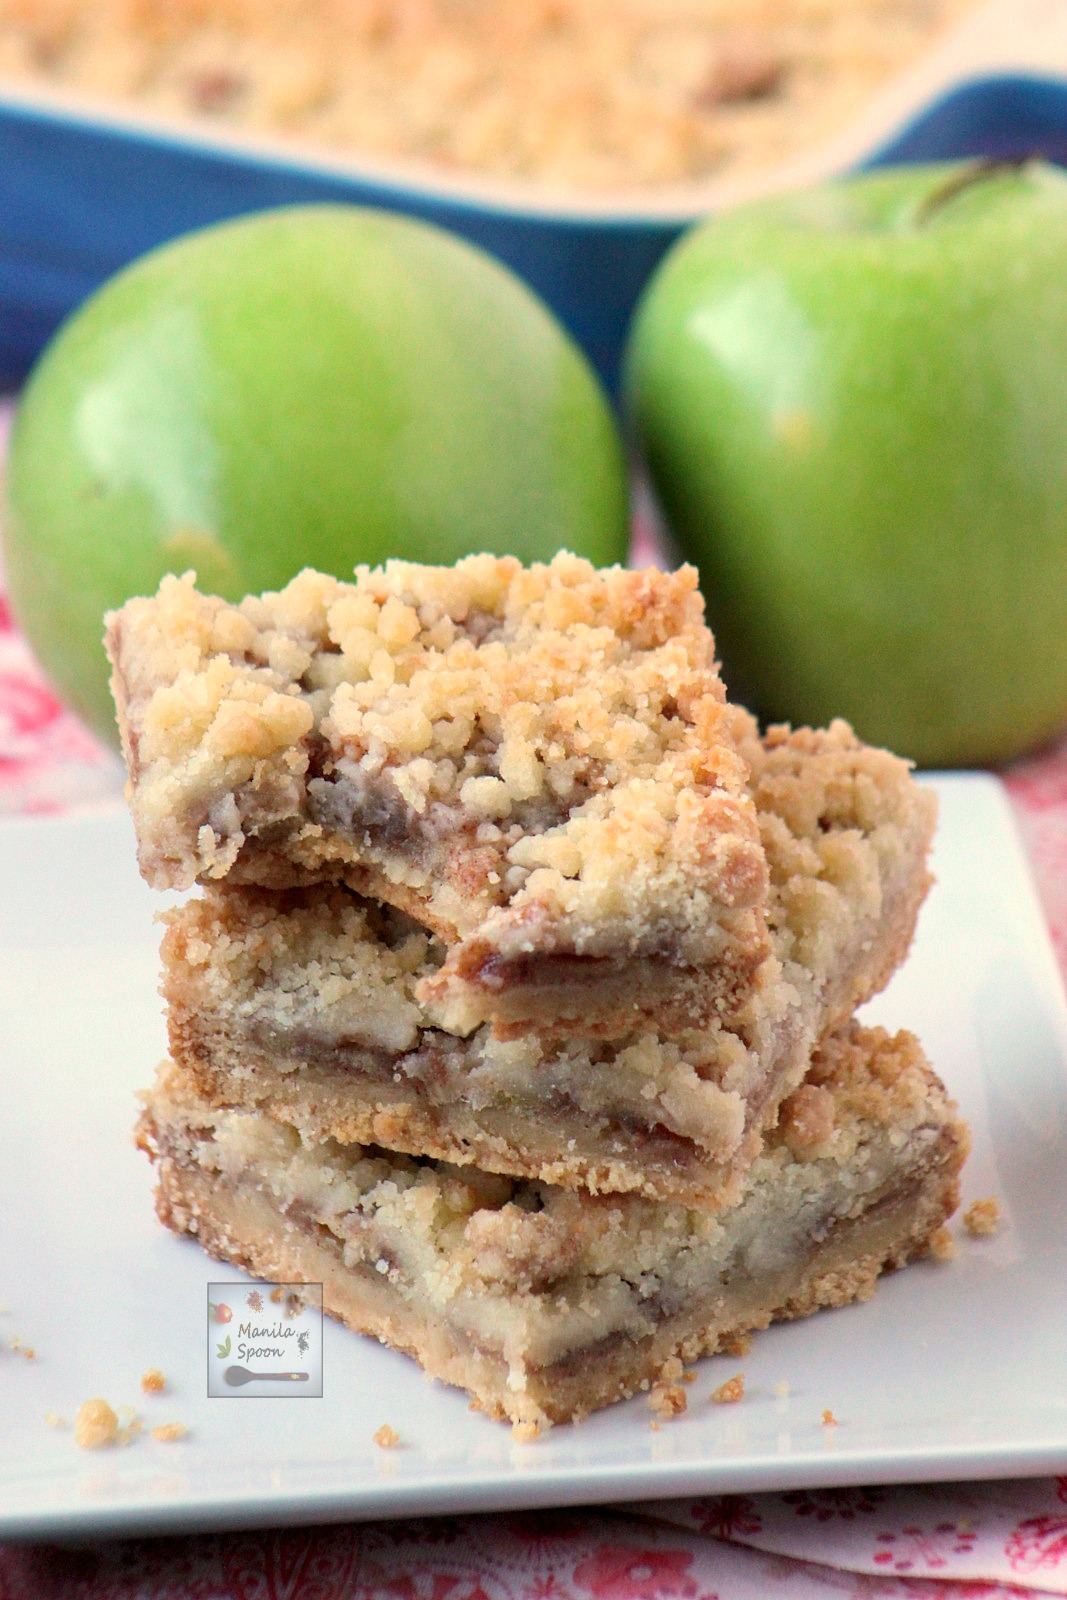 All the flavors of your favorite apple pie and the delicious Dutch-style crumb topping make these bar cookies exceptionally yummy! Easy to make as well - Dutch Apple Pie Bars!